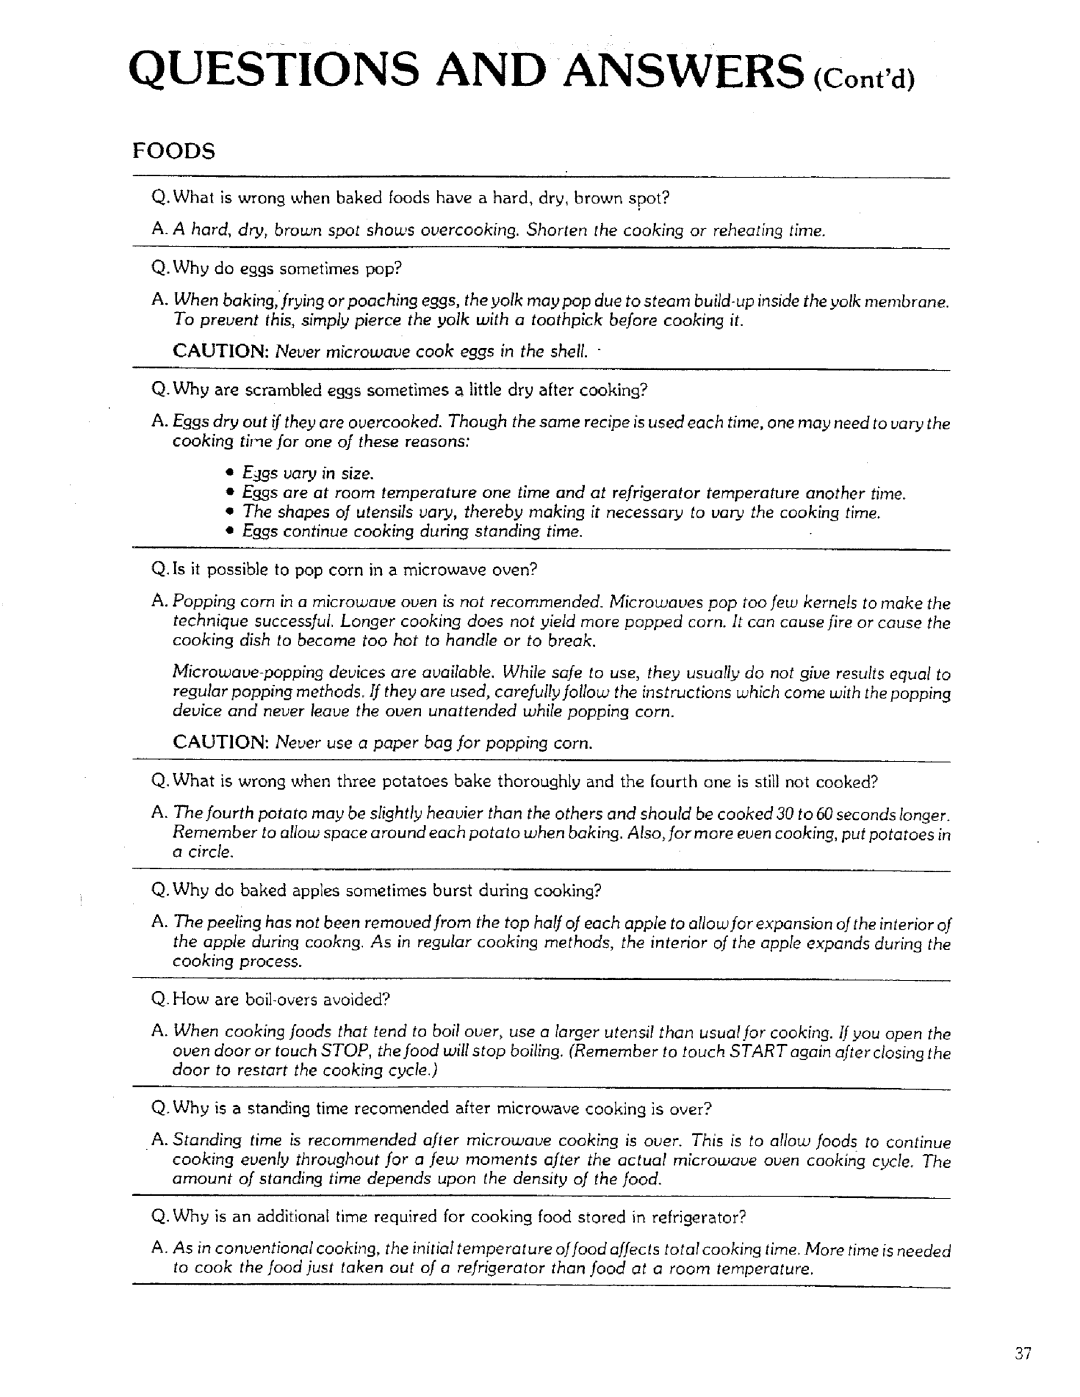 Sears 85951 manual QUESTIONS AND ANSWERS Co,-,td, Foods 